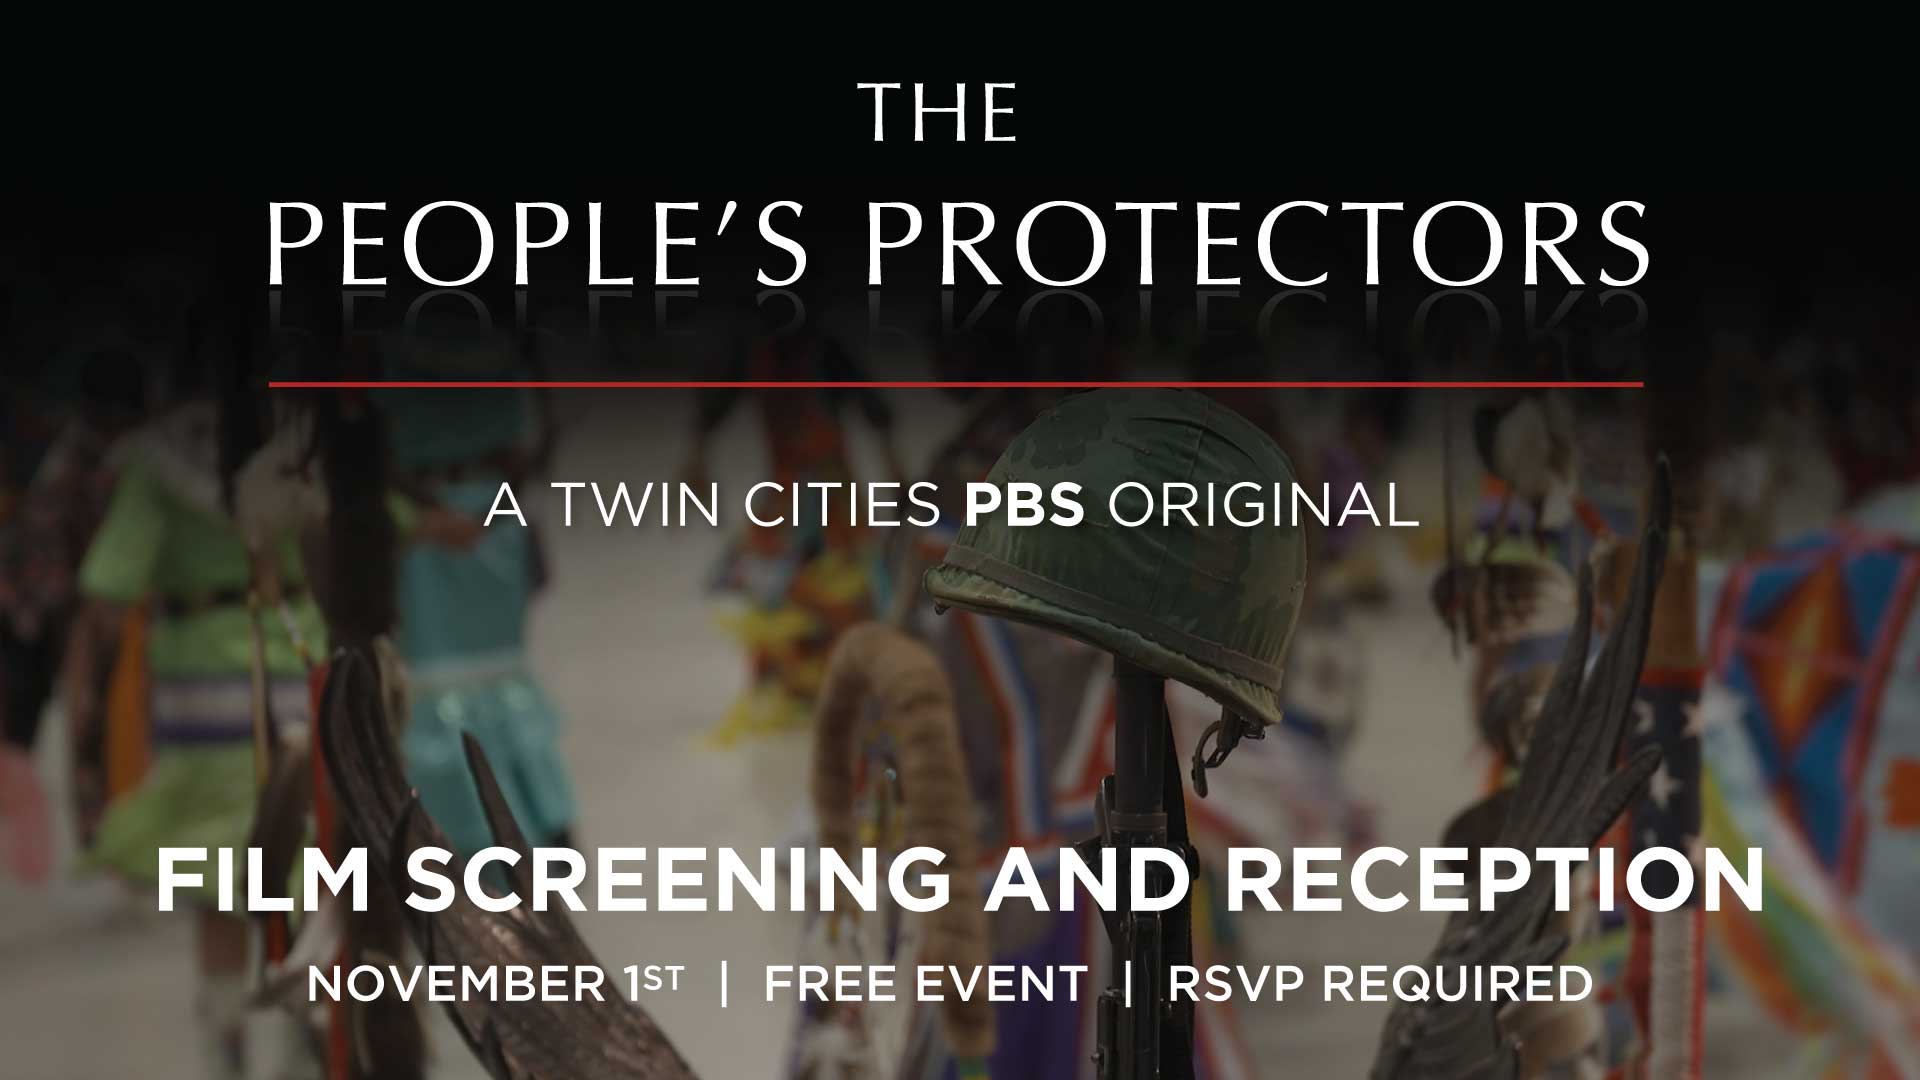 The People's Protectors Film Screening and Reception